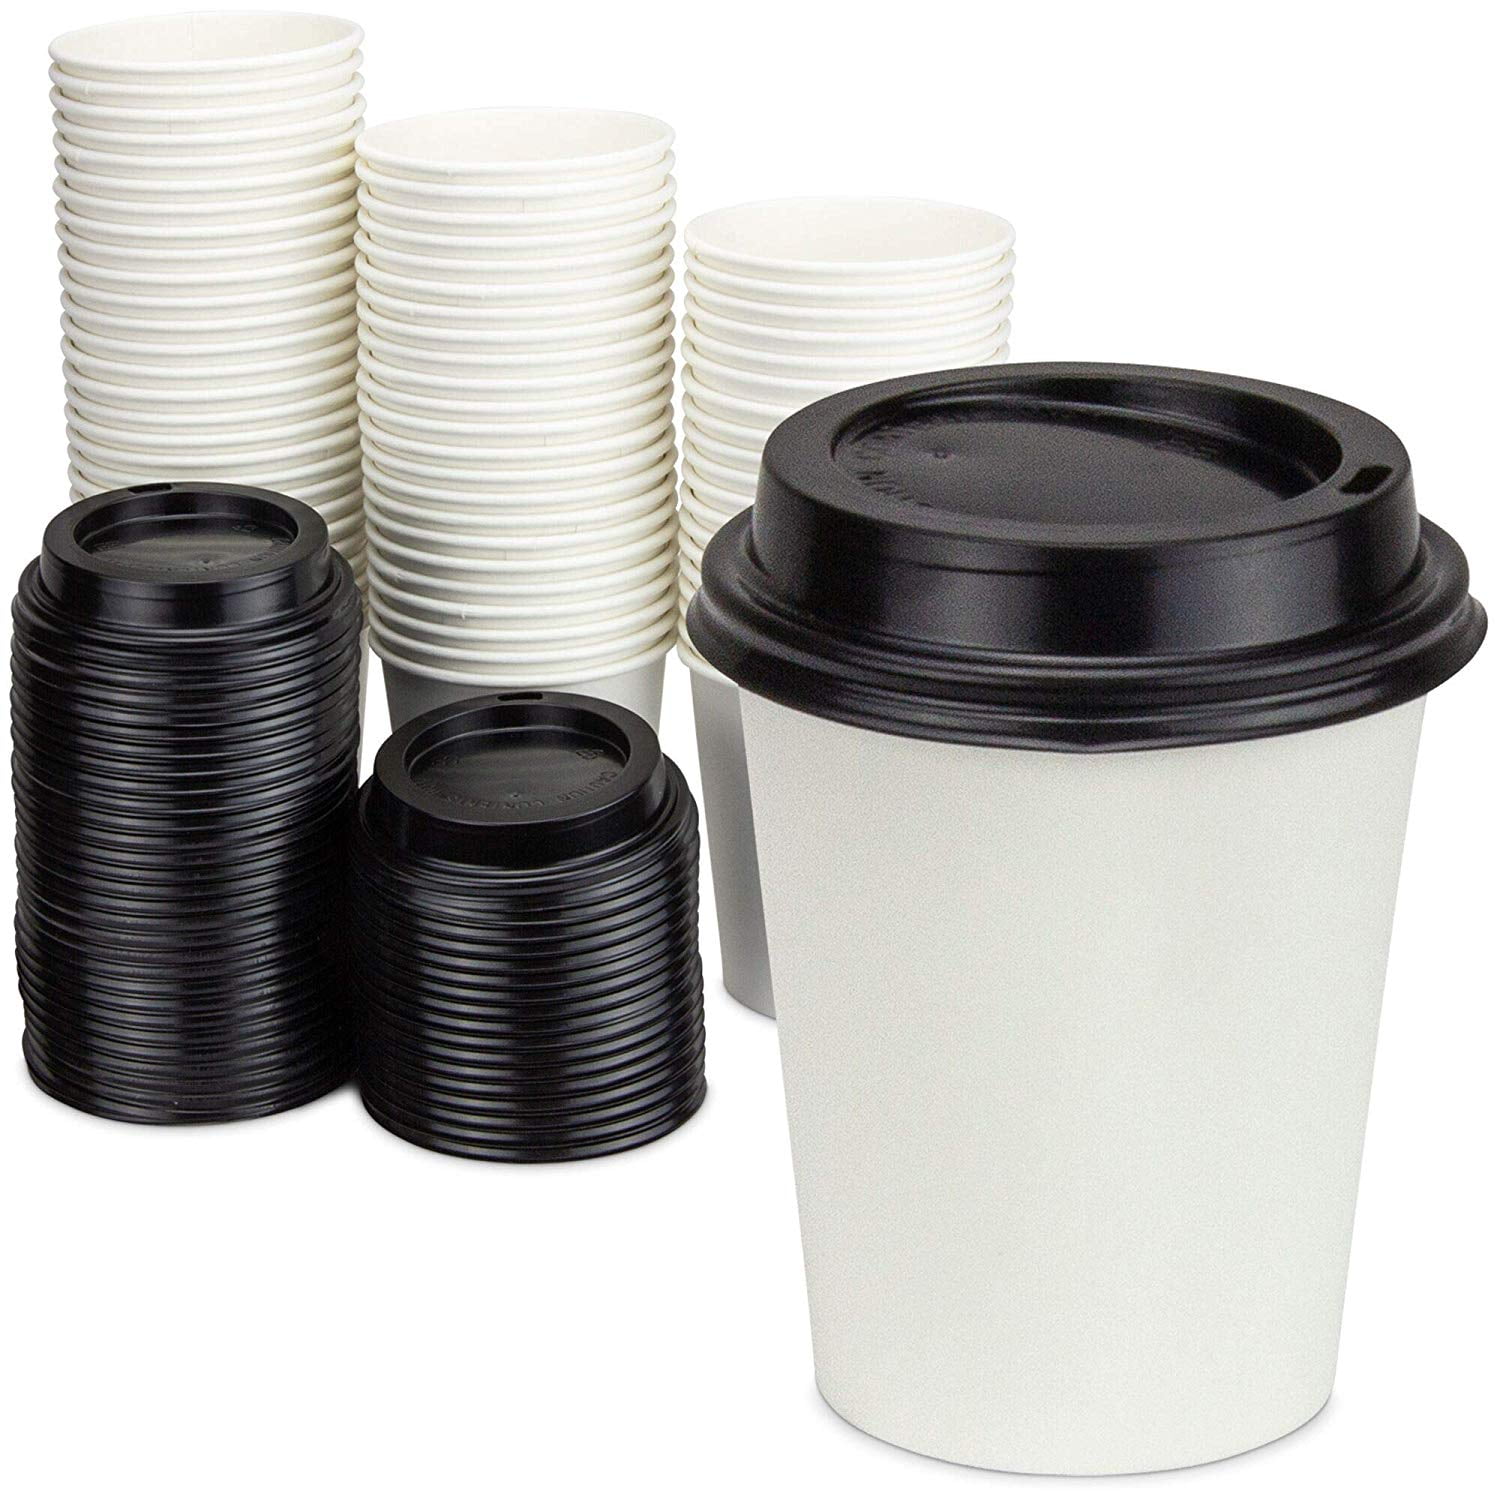 100 X 7oz White Disposable Paper Cups Single Wall Cups White Paper Cups Sealed 